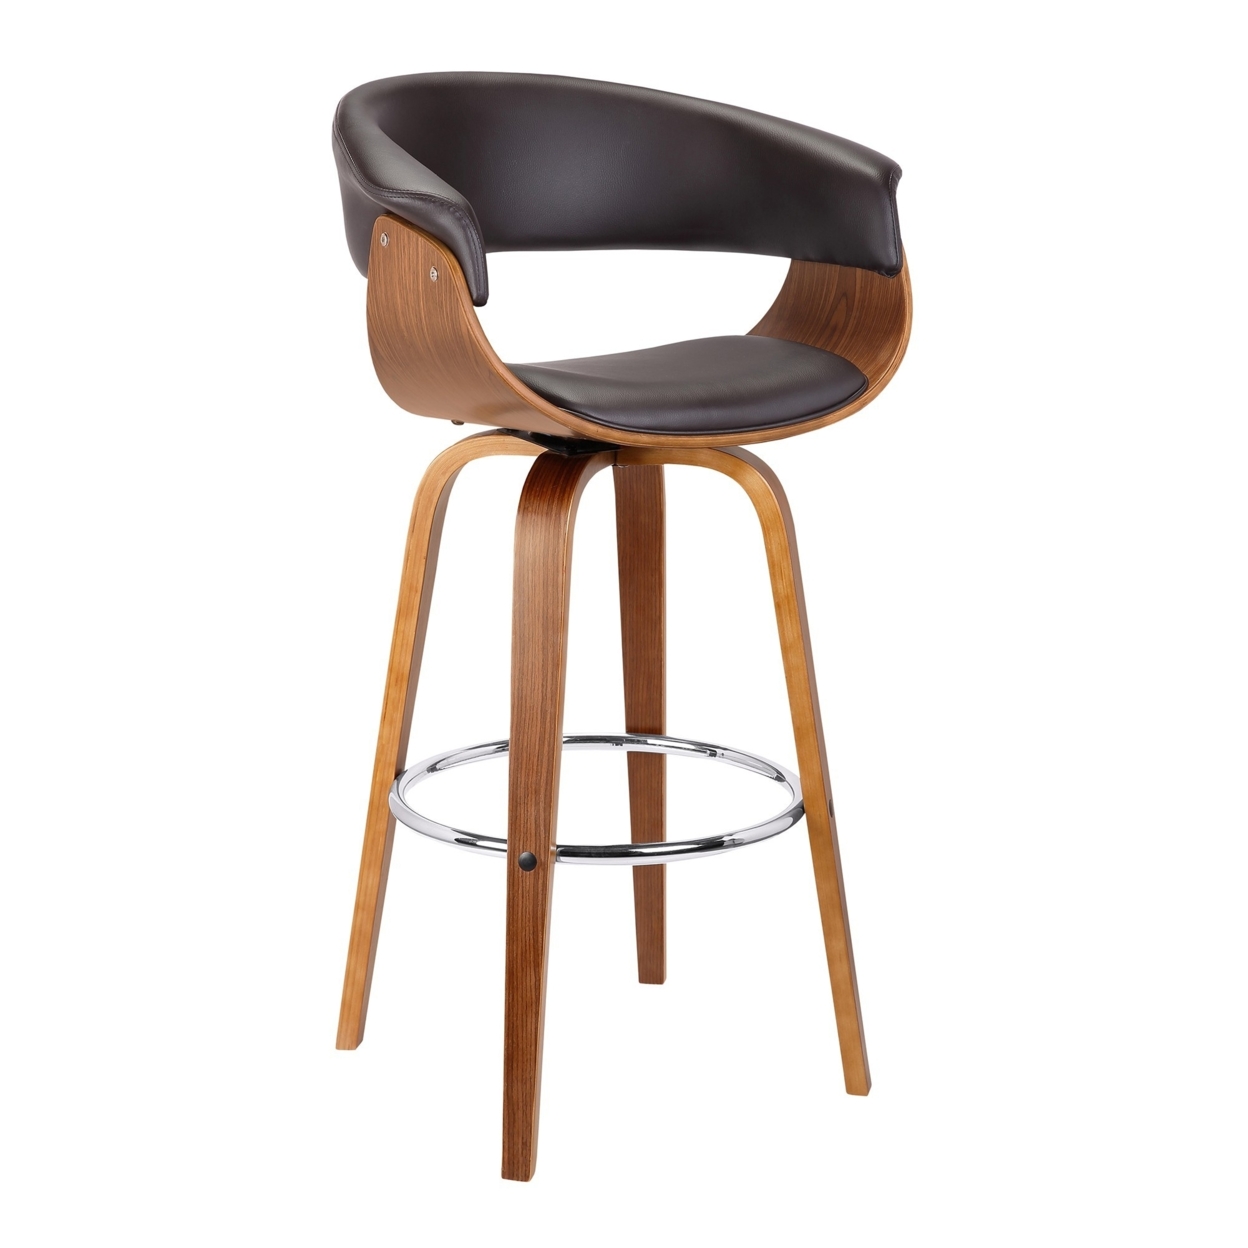 30 Inches Leatherette Swivel Barstool With Curved Design Seat, Brown- Saltoro Sherpi